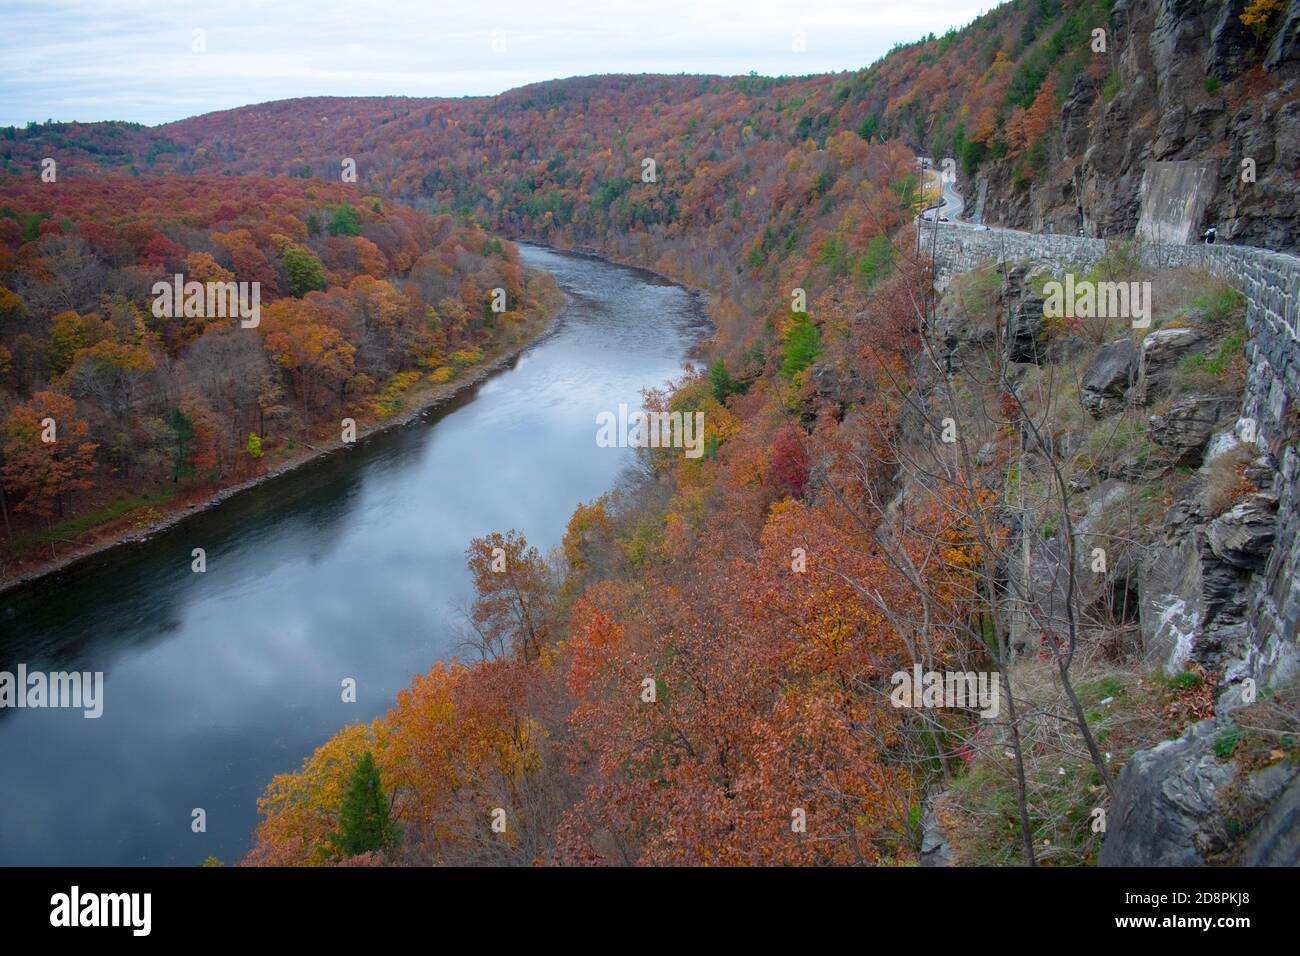 Hawk's Nest Highway, a winding scenic road along the Delaware River, at Sparrow Bush, New York -01 Stock Photo